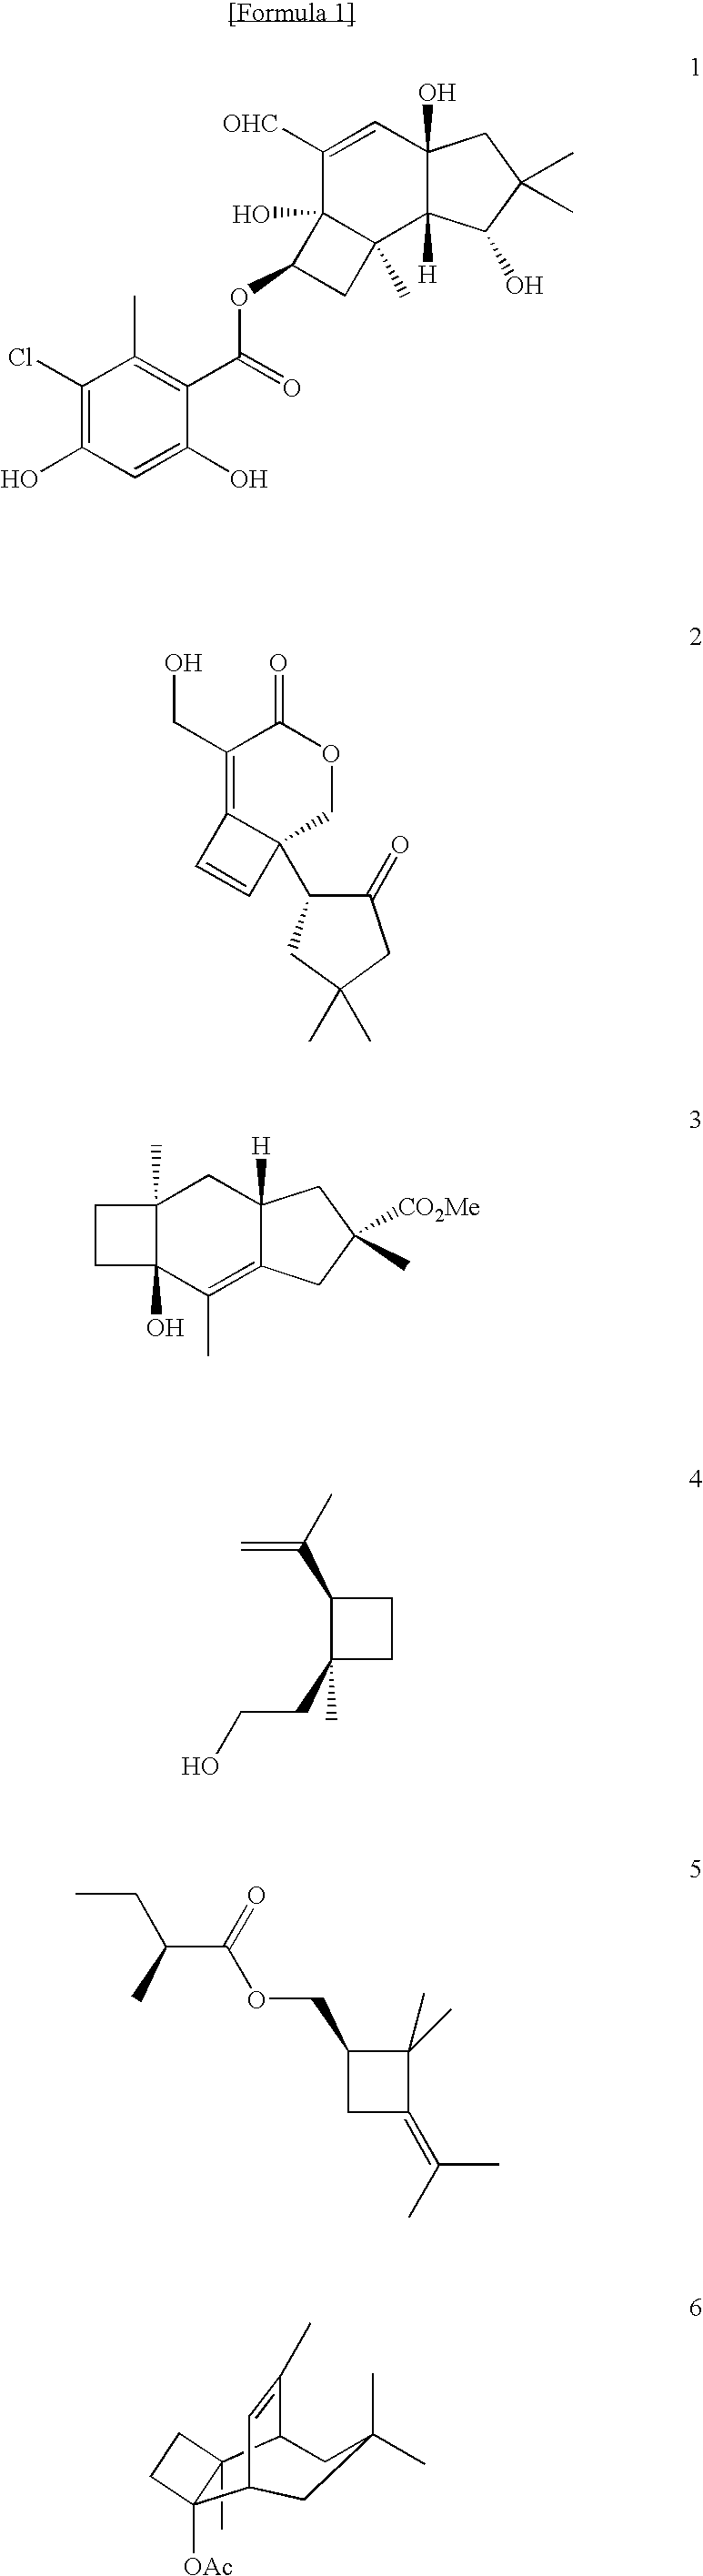 Process for Production of Polysubstituted Cyclobutanes and Polysubstituted Cyclobutenes